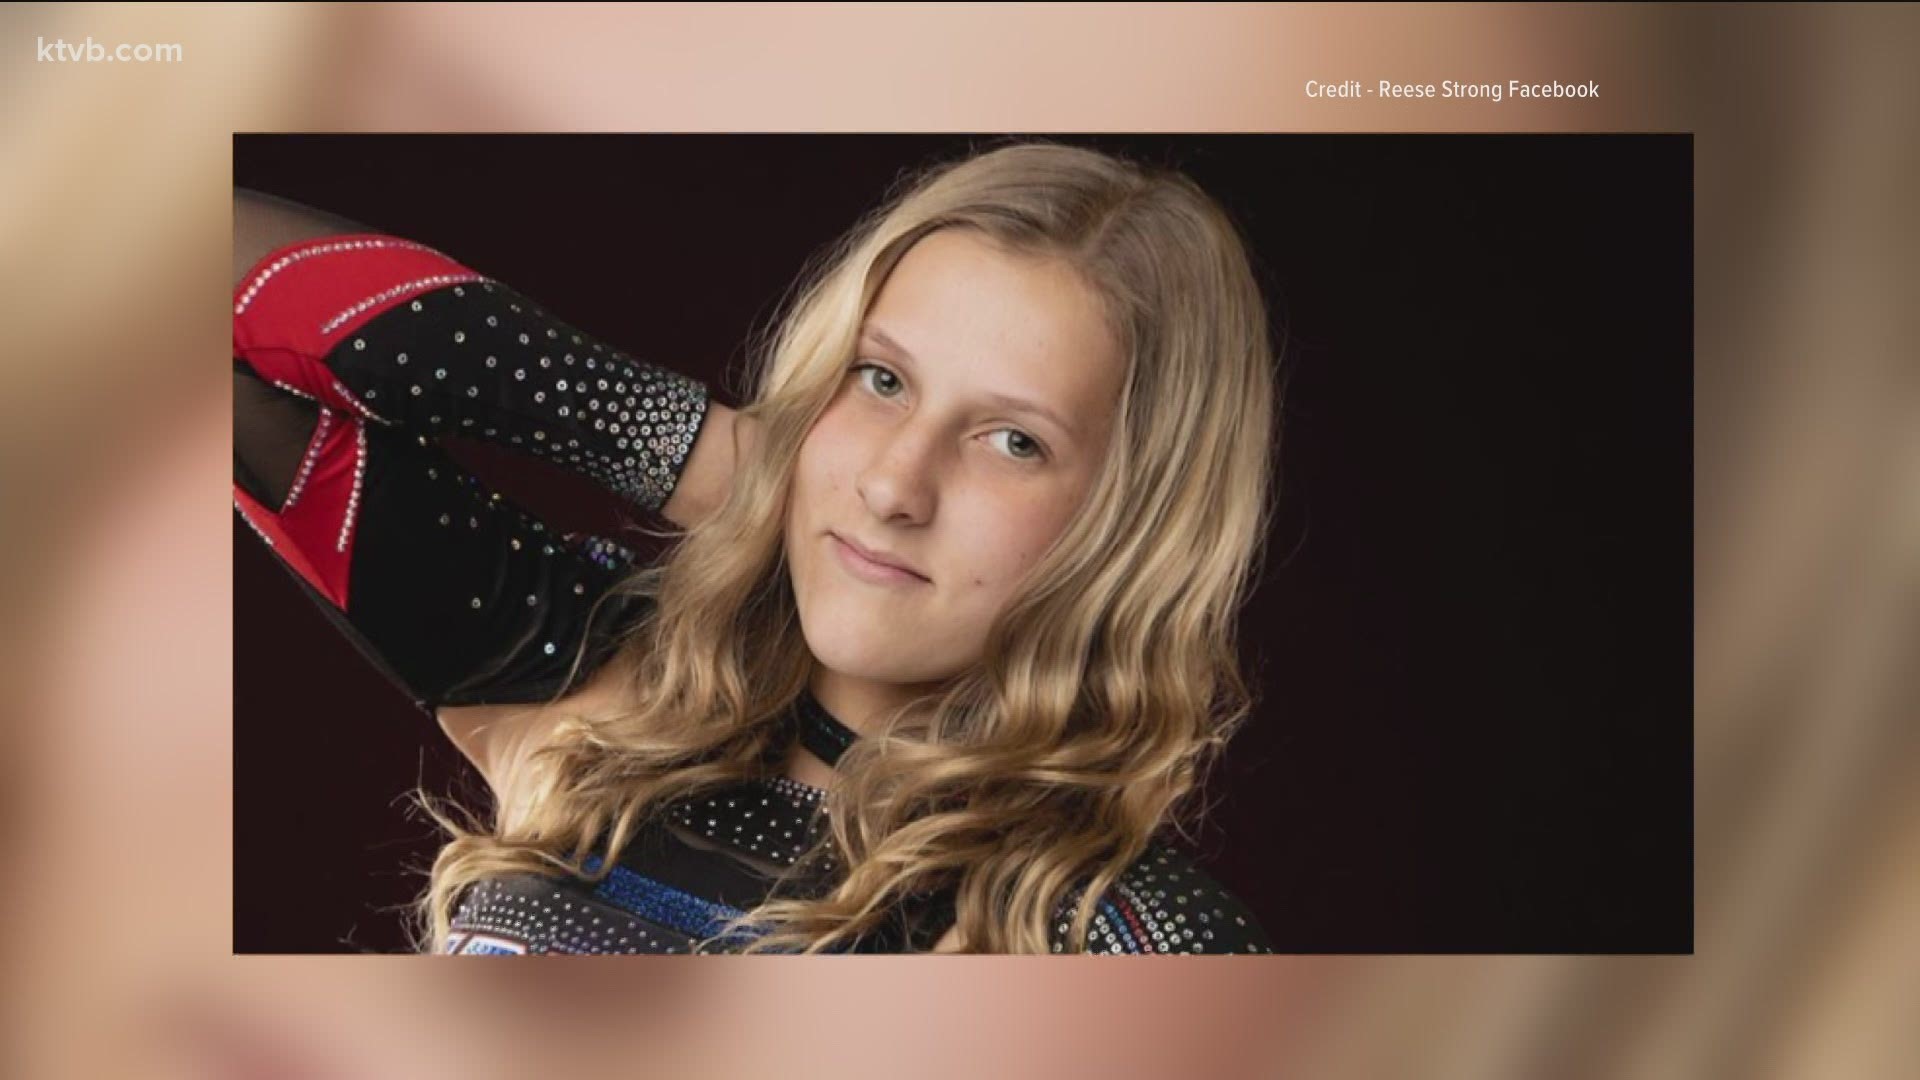 An Eagle family is raising money to increase awareness about food allergies following the death of their 13-year-old daughter last month.